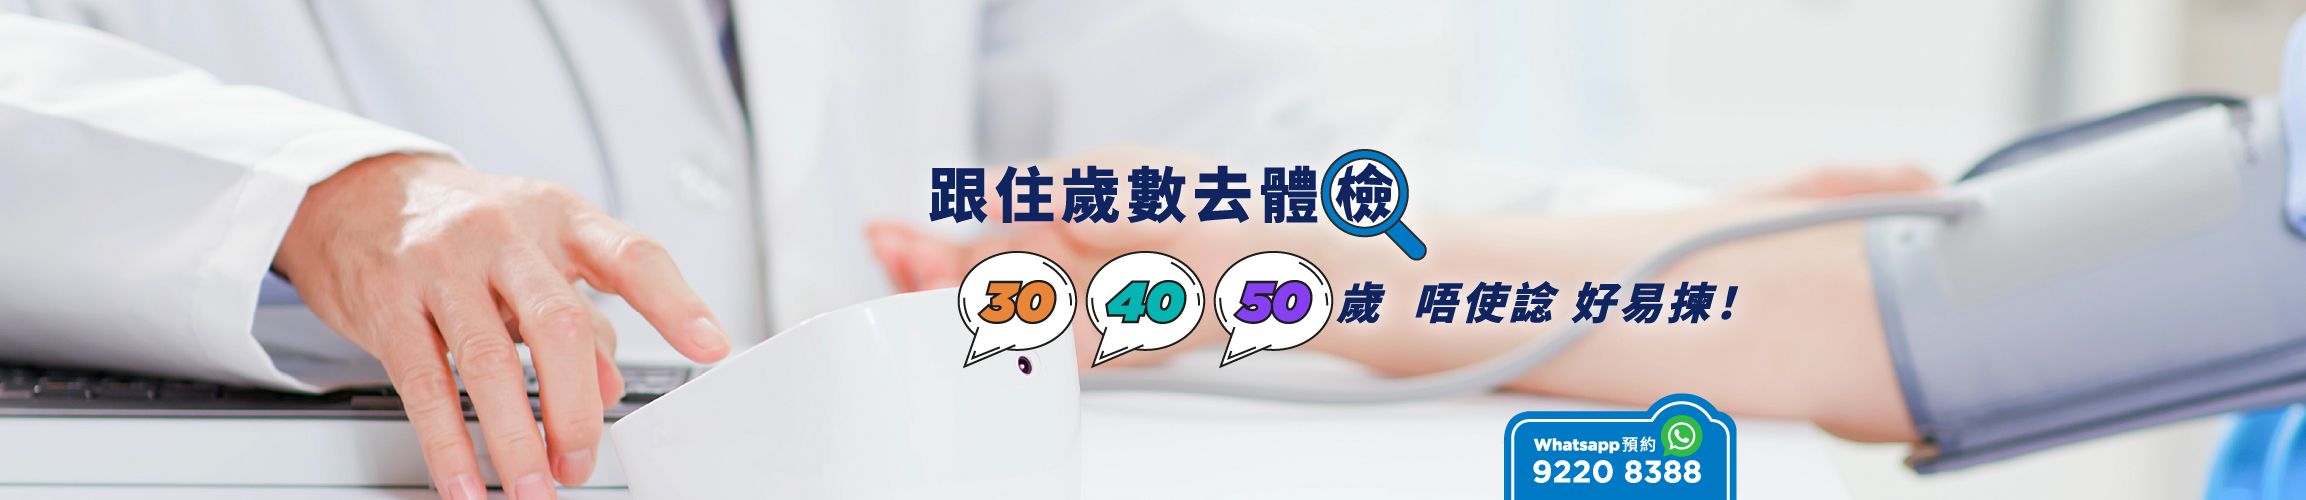 Health Screenings by Age banner_Chinese